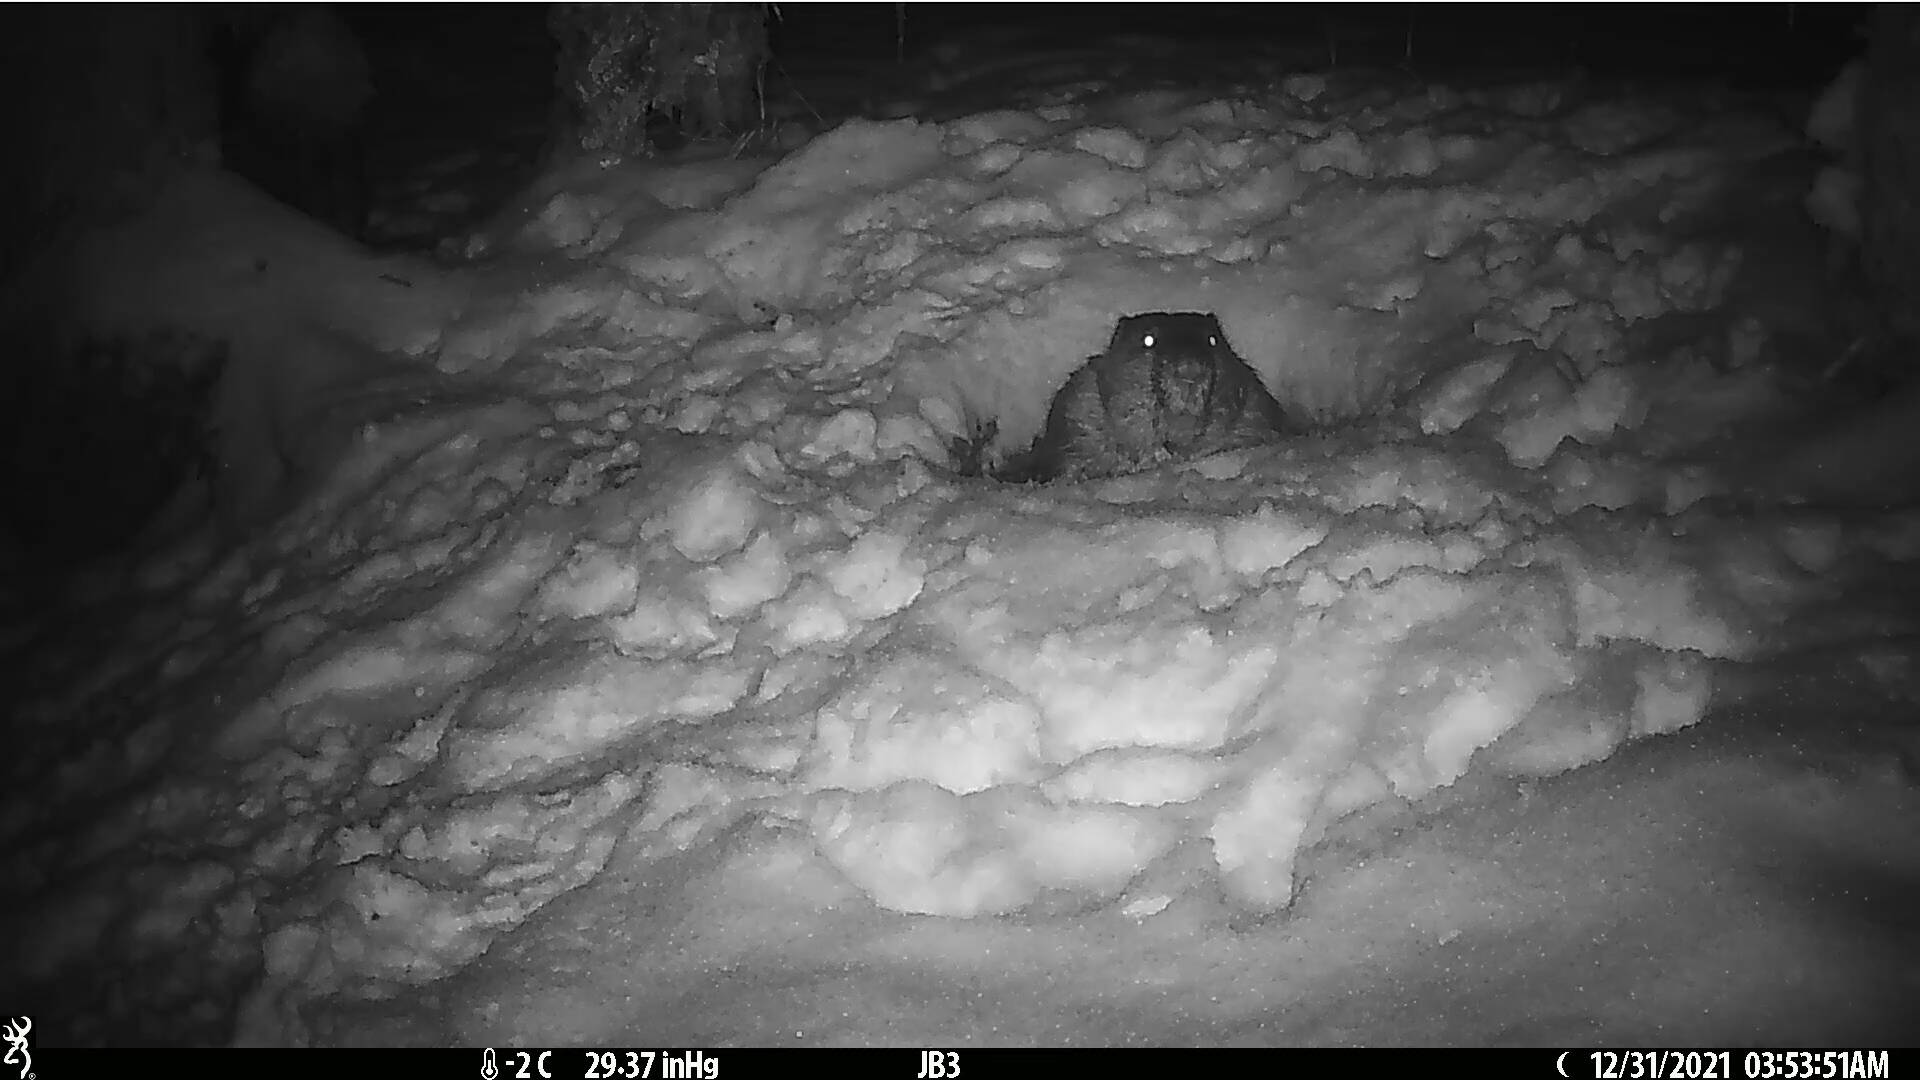 Courtesy Photo / Jos Bakker
A trail cam photo shows a beaver emerging from its snowy lodge and went foraging for branches in December.